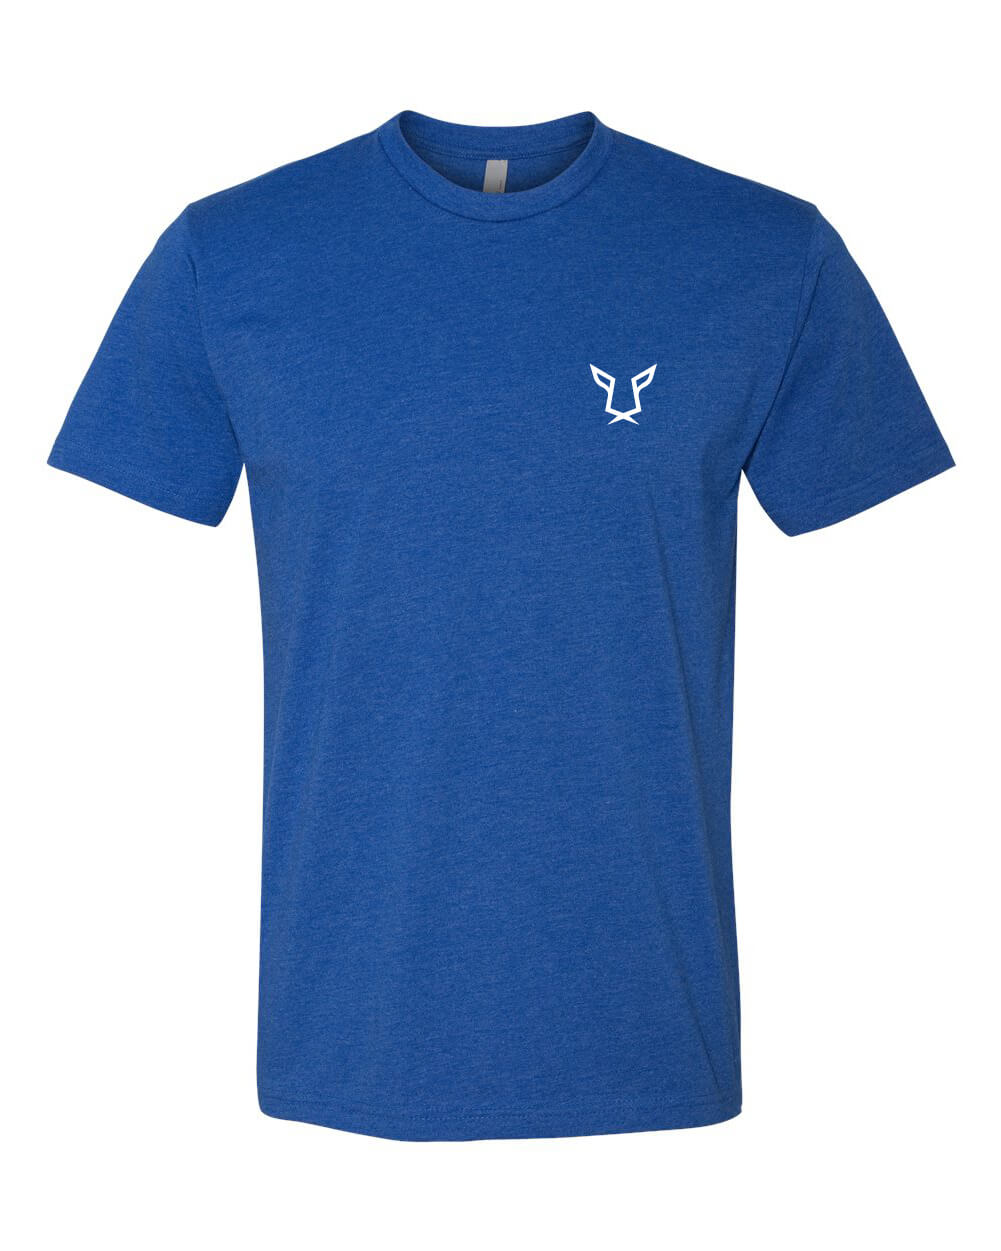 Men's Royal Evolution Everyday Tee by Odisi Apparel